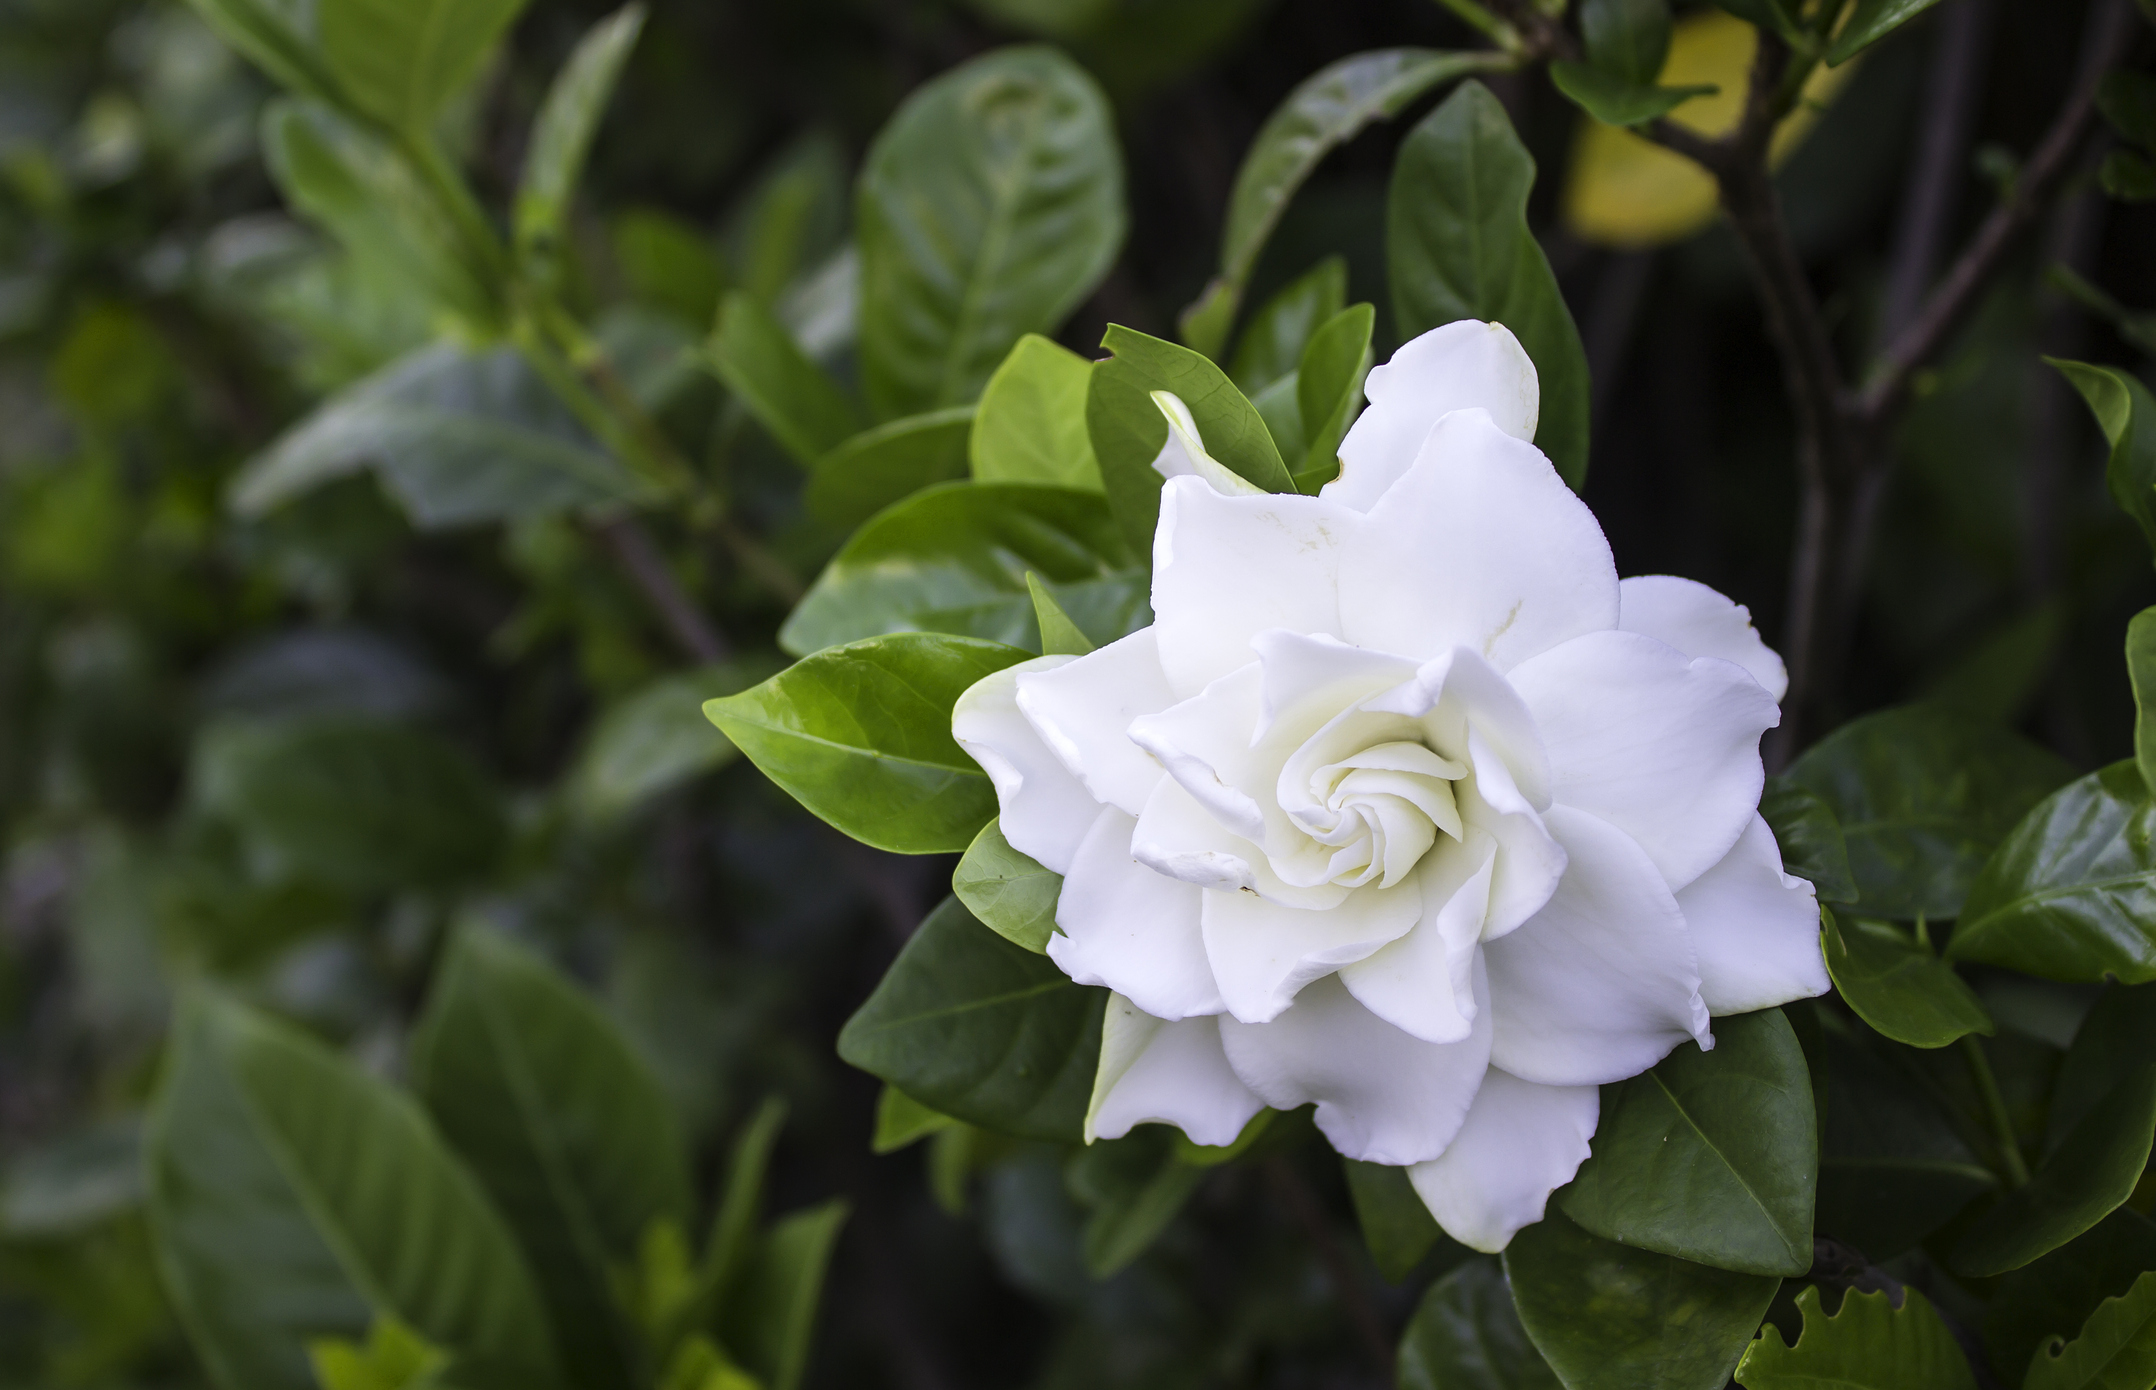 white gardenia blossom with green leaves in the background